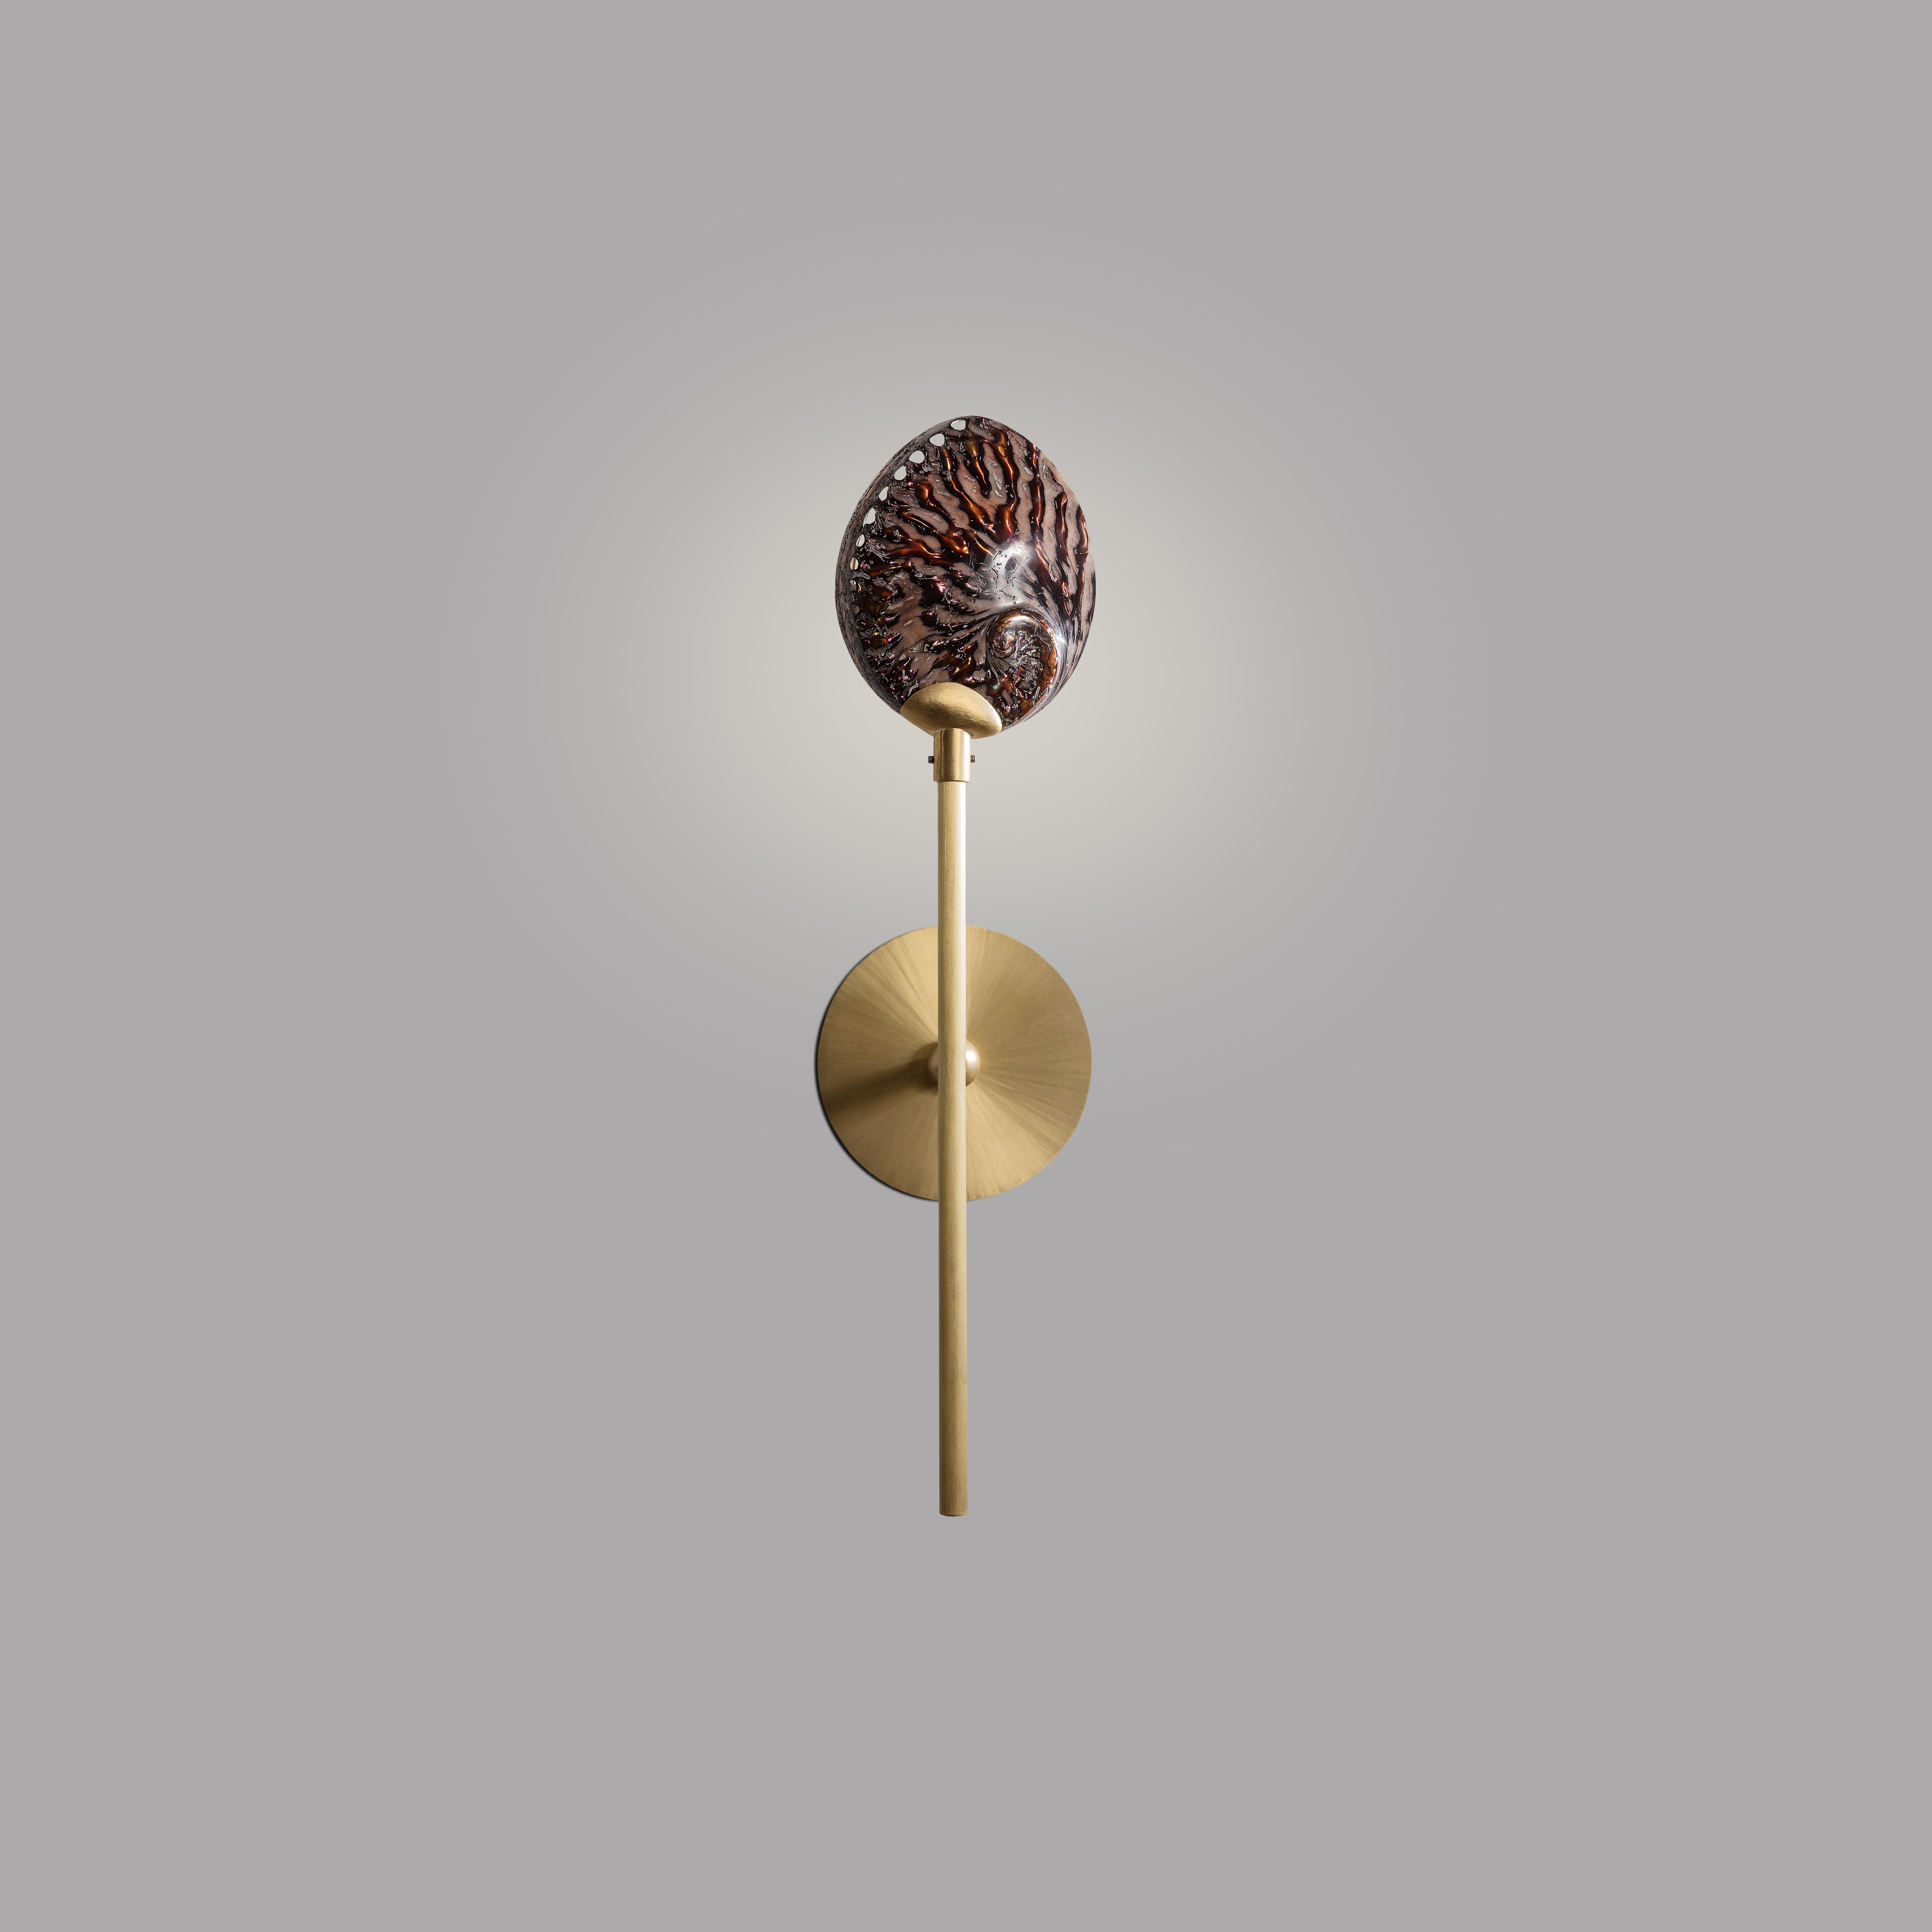 Coquillage wall light I by Ludovic Clément d’Armont
Dimensions: D 12 x W 14 x H 47 cm
Materials: Shell, brass.

Ludovic Clément d’Armont is in the continuation of a family tradition of centuries of gentle glassmakers, painters, carpenters and